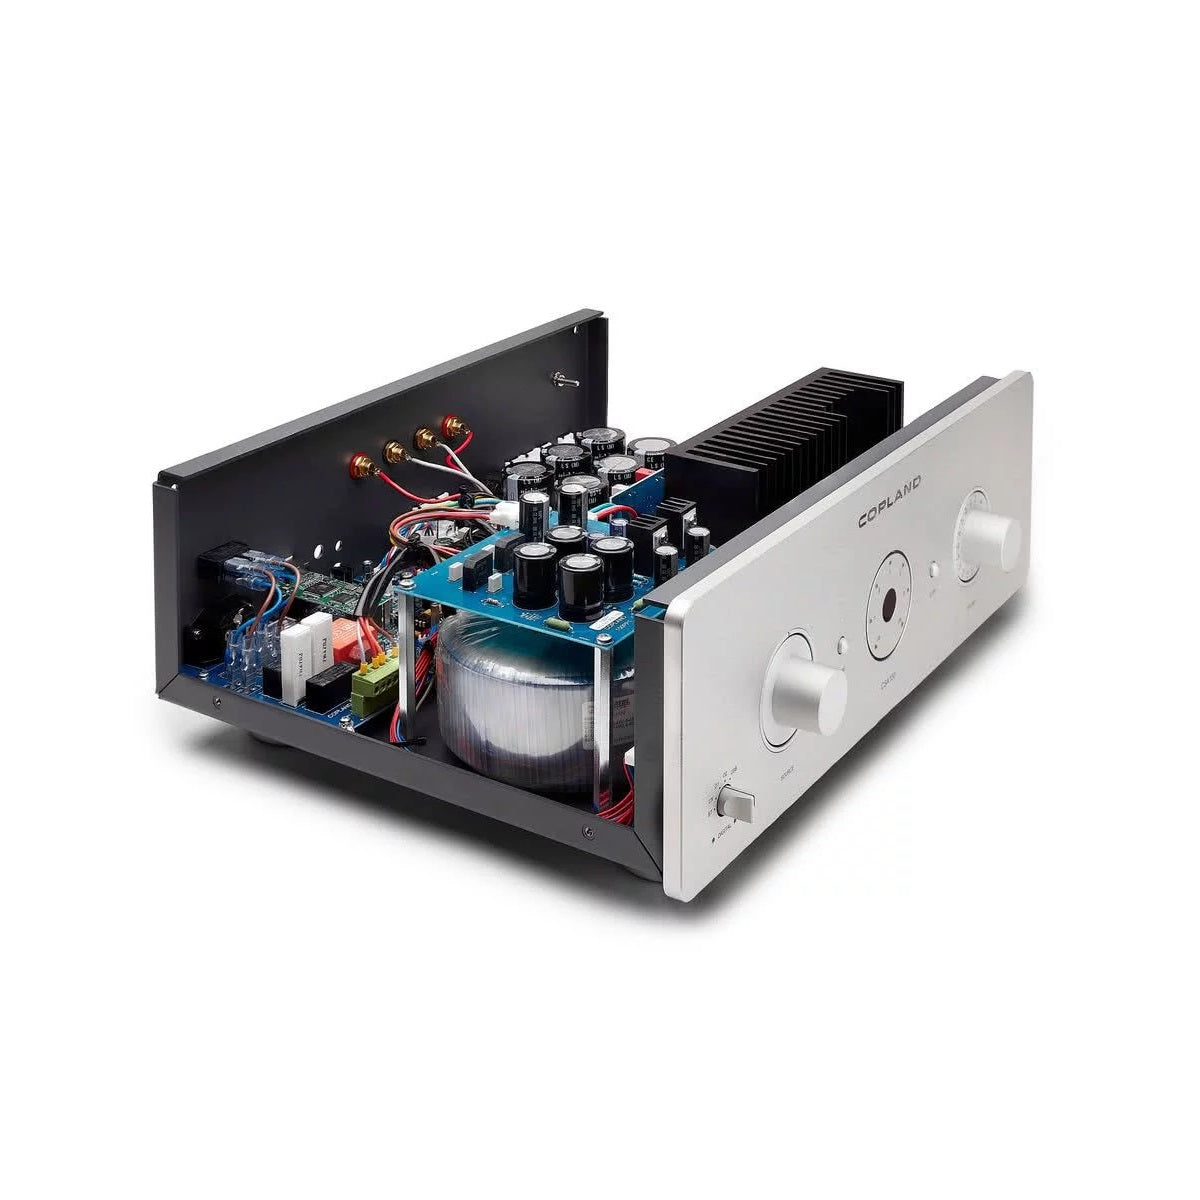 Trade-in Copland CSA 150 Hybrid Integrated Amplifier - Black